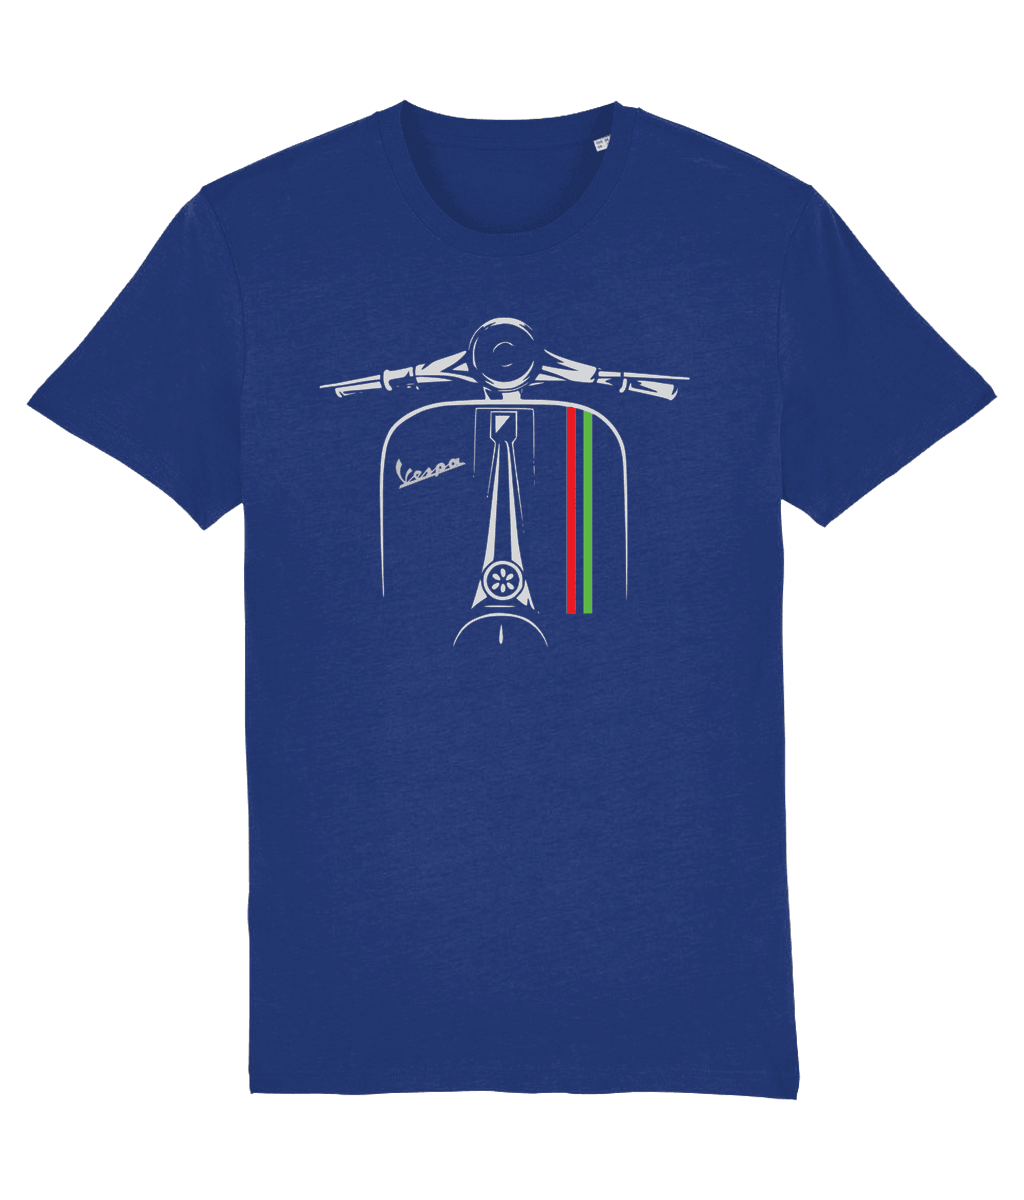 VESPA ITALIA: T-Shirt Inspired by Classic Vespa Scooters (Silver Badge with 4 Colour Options) Small to 4XL ( - SOUND IS COLOUR